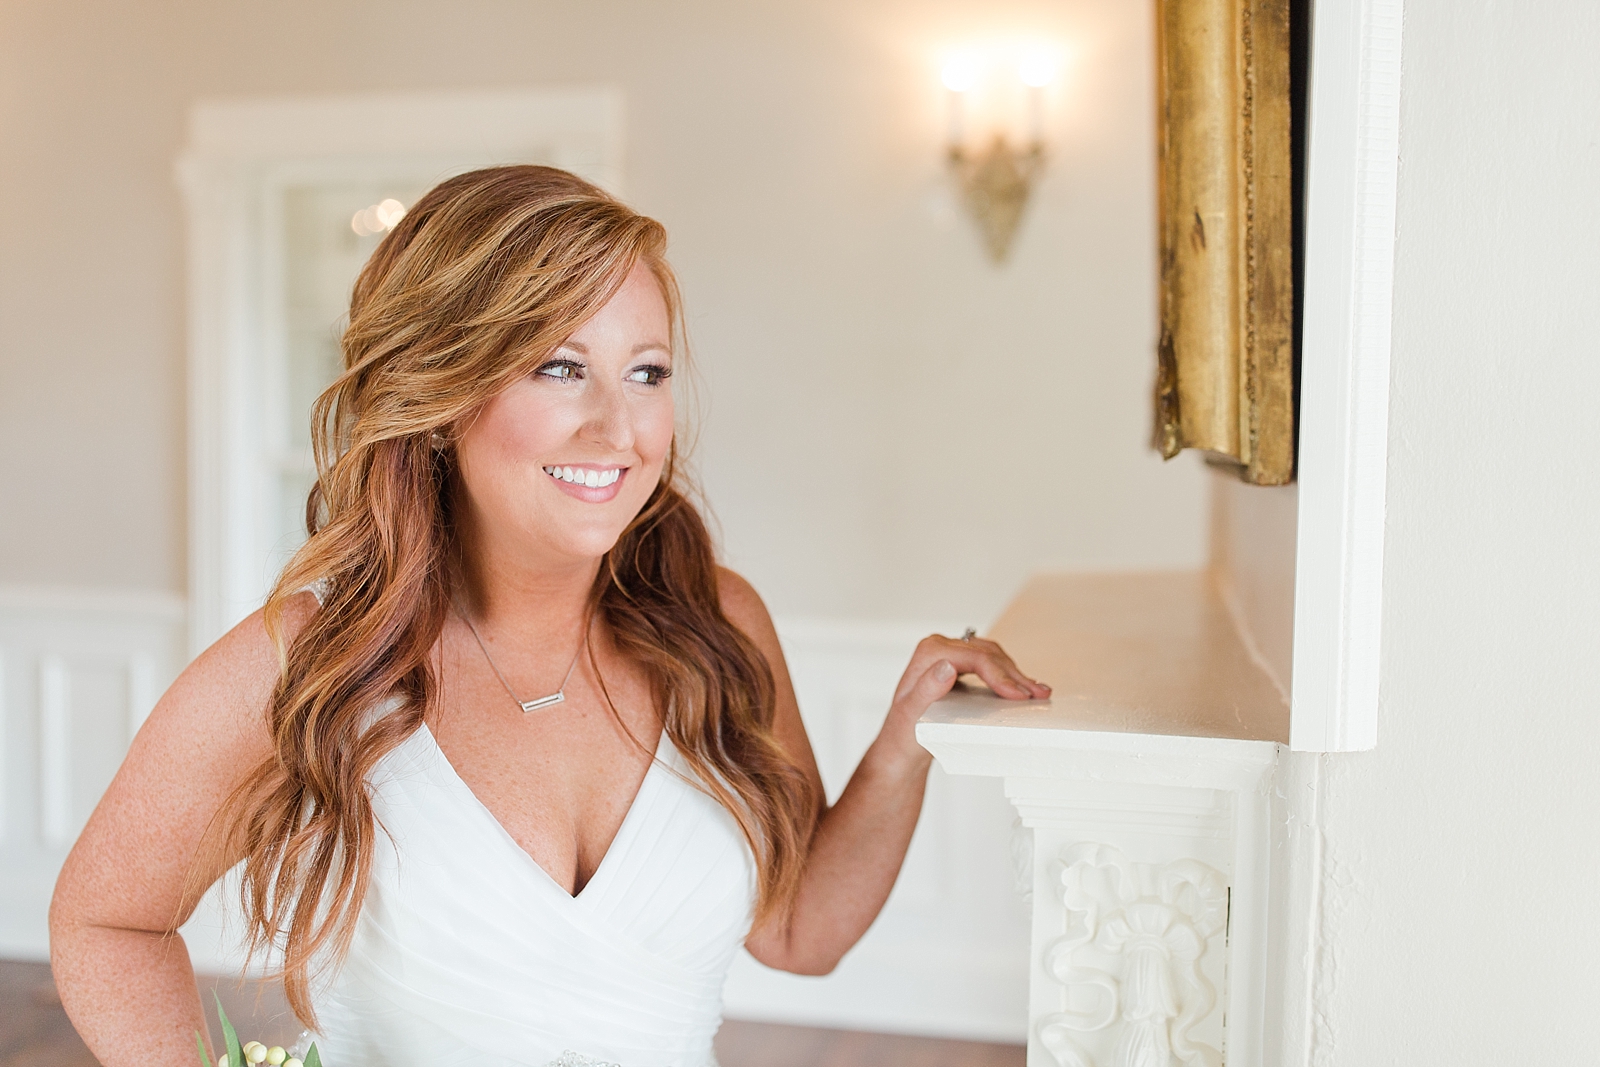 Dahlonega Wedding Venue Bride holding onto the fireplace mantle looking out the window smiling Photo